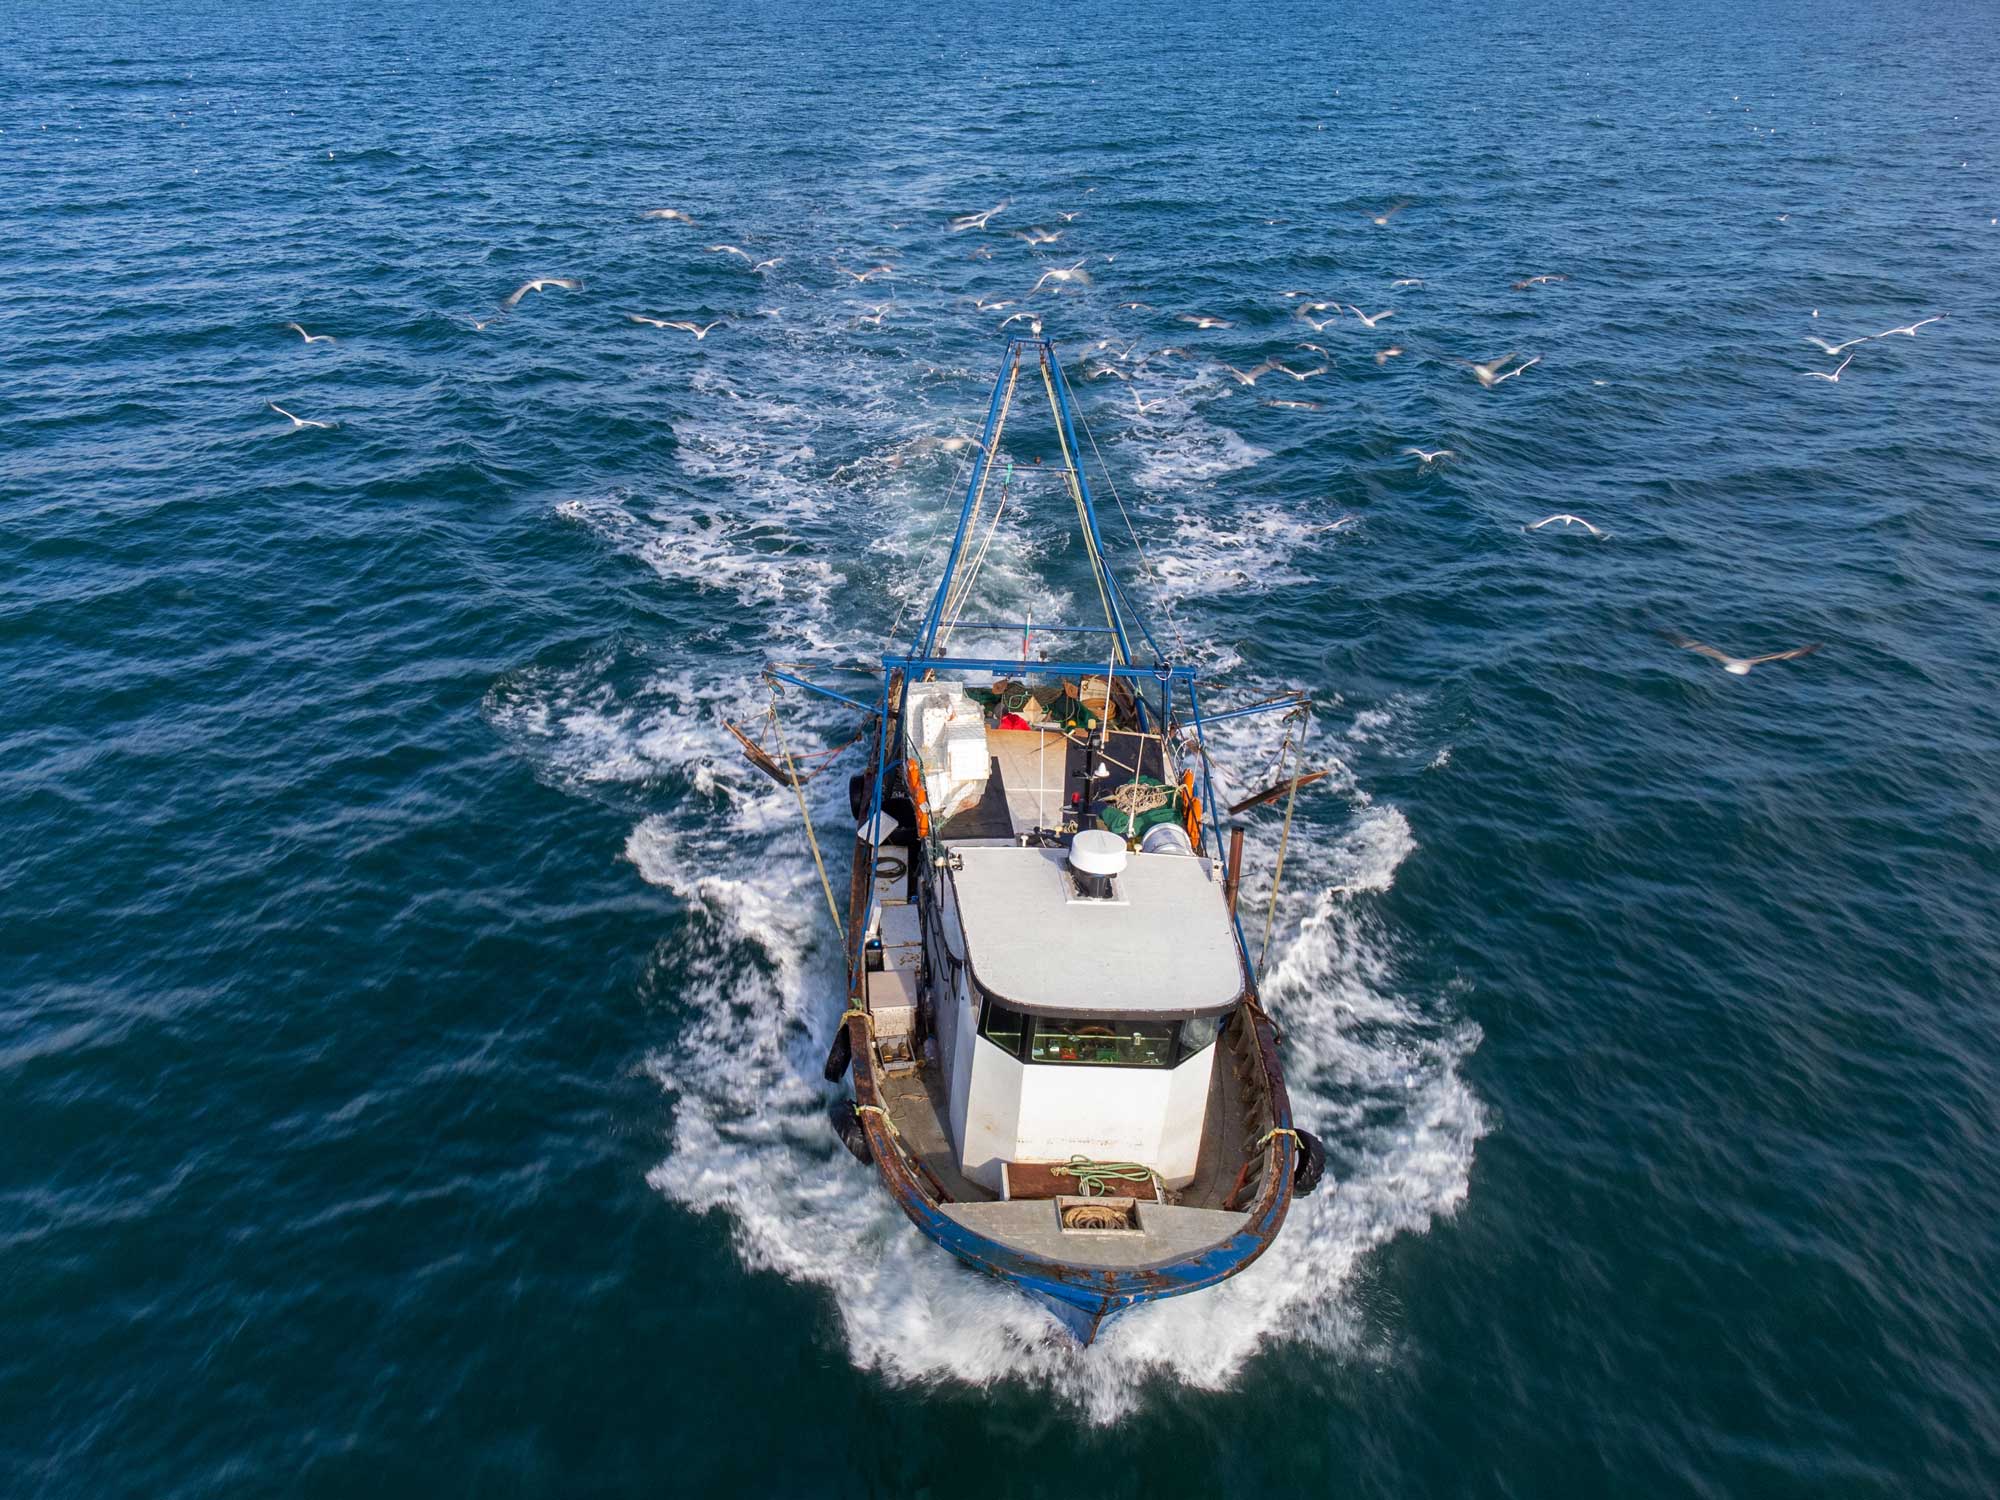 Clipper Oil: Latest Fishing News – Tuna Commission Adopts New Management Procedure for Skipjack